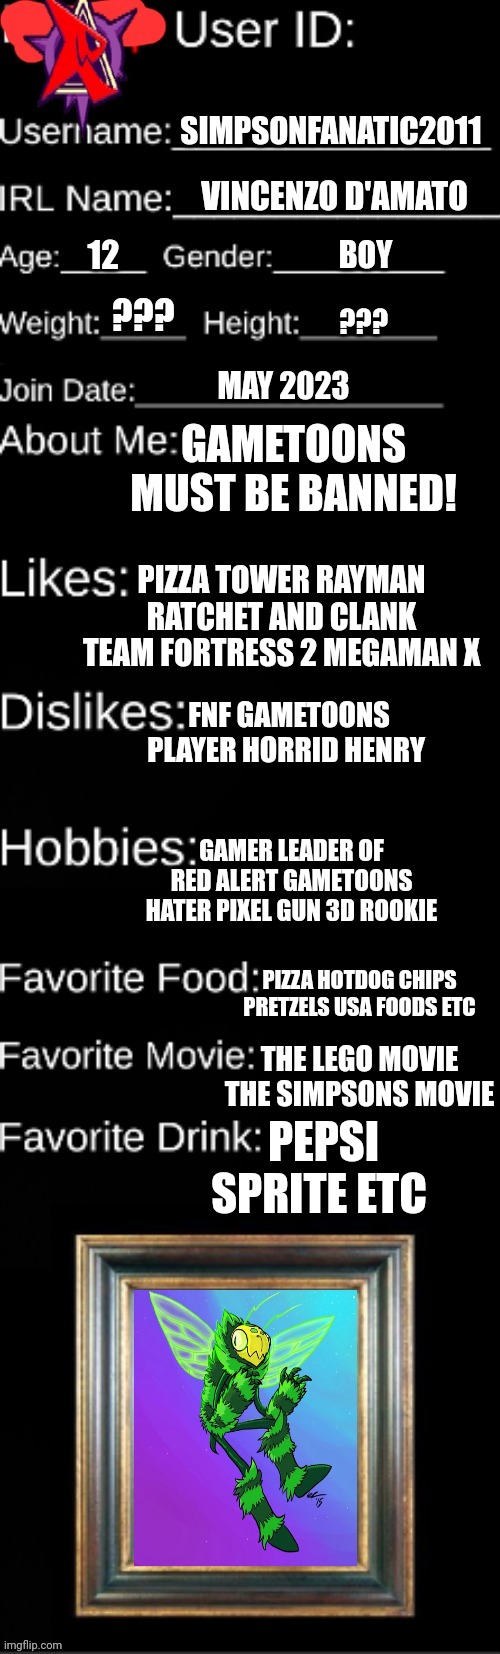 I'm the leader of red alert! | SIMPSONFANATIC2011; VINCENZO D'AMATO; 12; BOY; ??? ??? MAY 2023; GAMETOONS MUST BE BANNED! PIZZA TOWER RAYMAN RATCHET AND CLANK TEAM FORTRESS 2 MEGAMAN X; FNF GAMETOONS PLAYER HORRID HENRY; GAMER LEADER OF RED ALERT GAMETOONS HATER PIXEL GUN 3D ROOKIE; PIZZA HOTDOG CHIPS PRETZELS USA FOODS ETC; THE LEGO MOVIE THE SIMPSONS MOVIE; PEPSI SPRITE ETC | image tagged in official agl id,red alert,leader | made w/ Imgflip meme maker